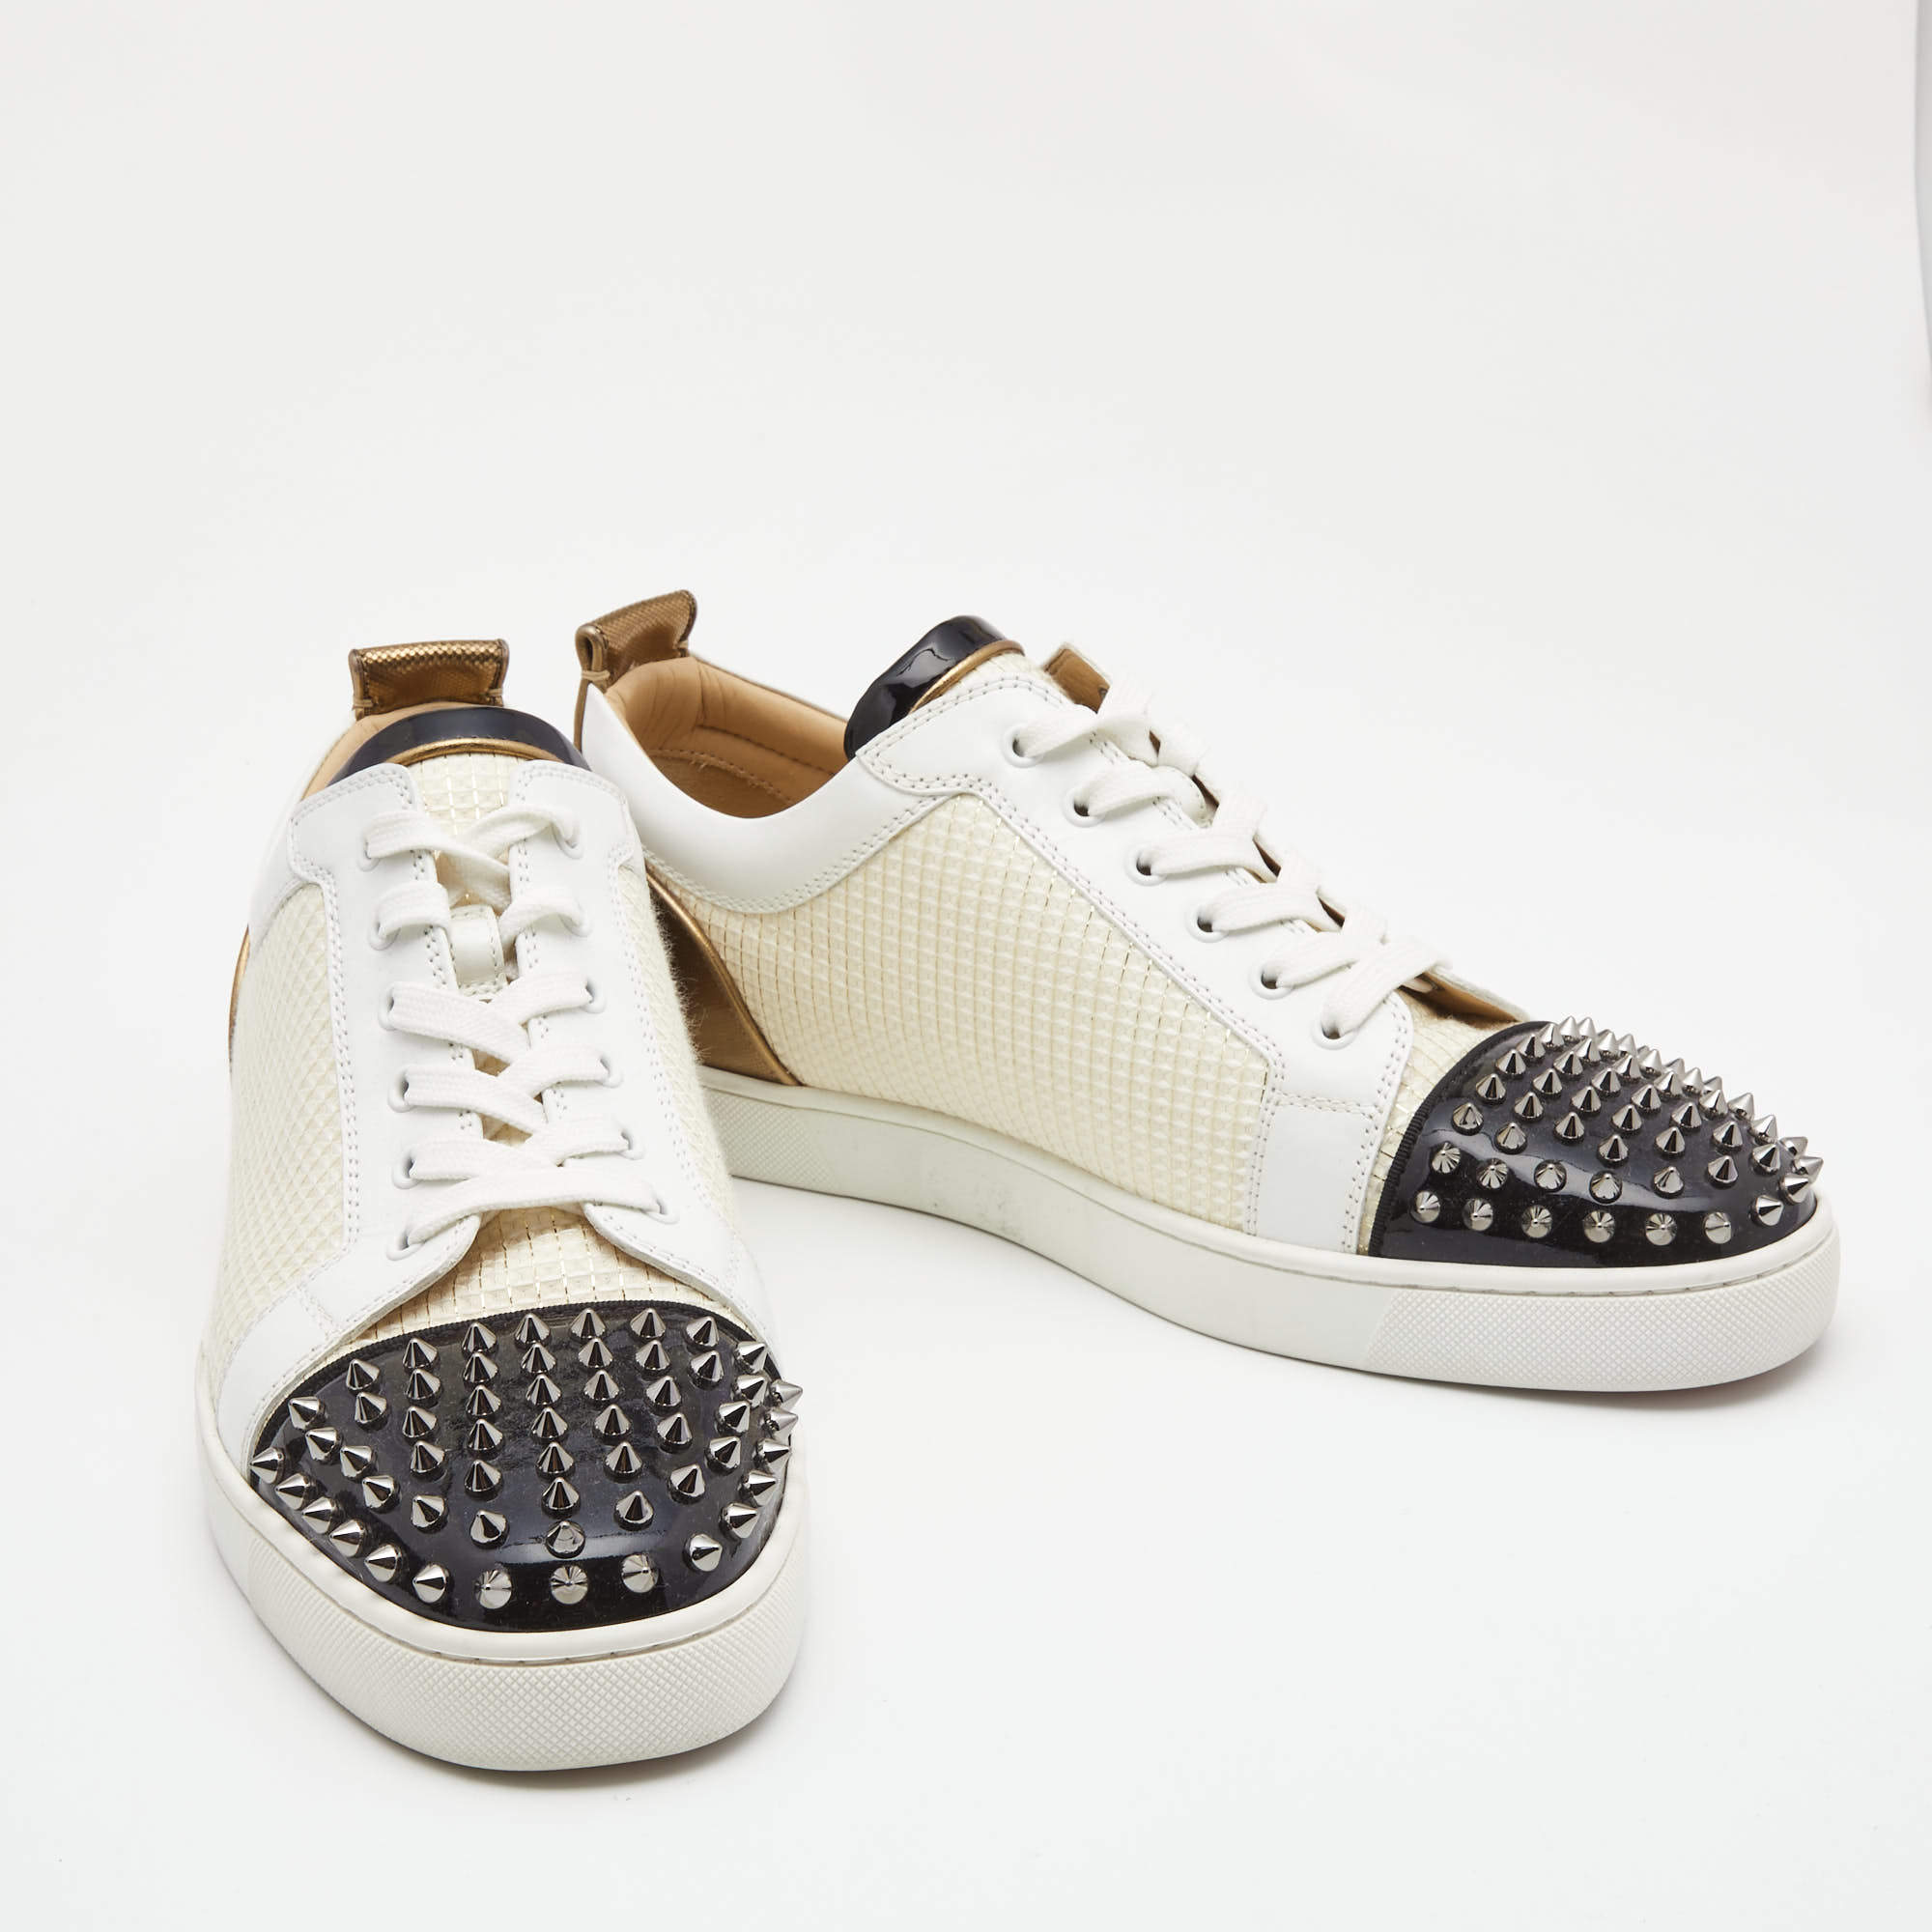 Christian Louboutin - Authenticated Louis Junior Spike Trainer - Leather Multicolour Plain for Men, Very Good Condition